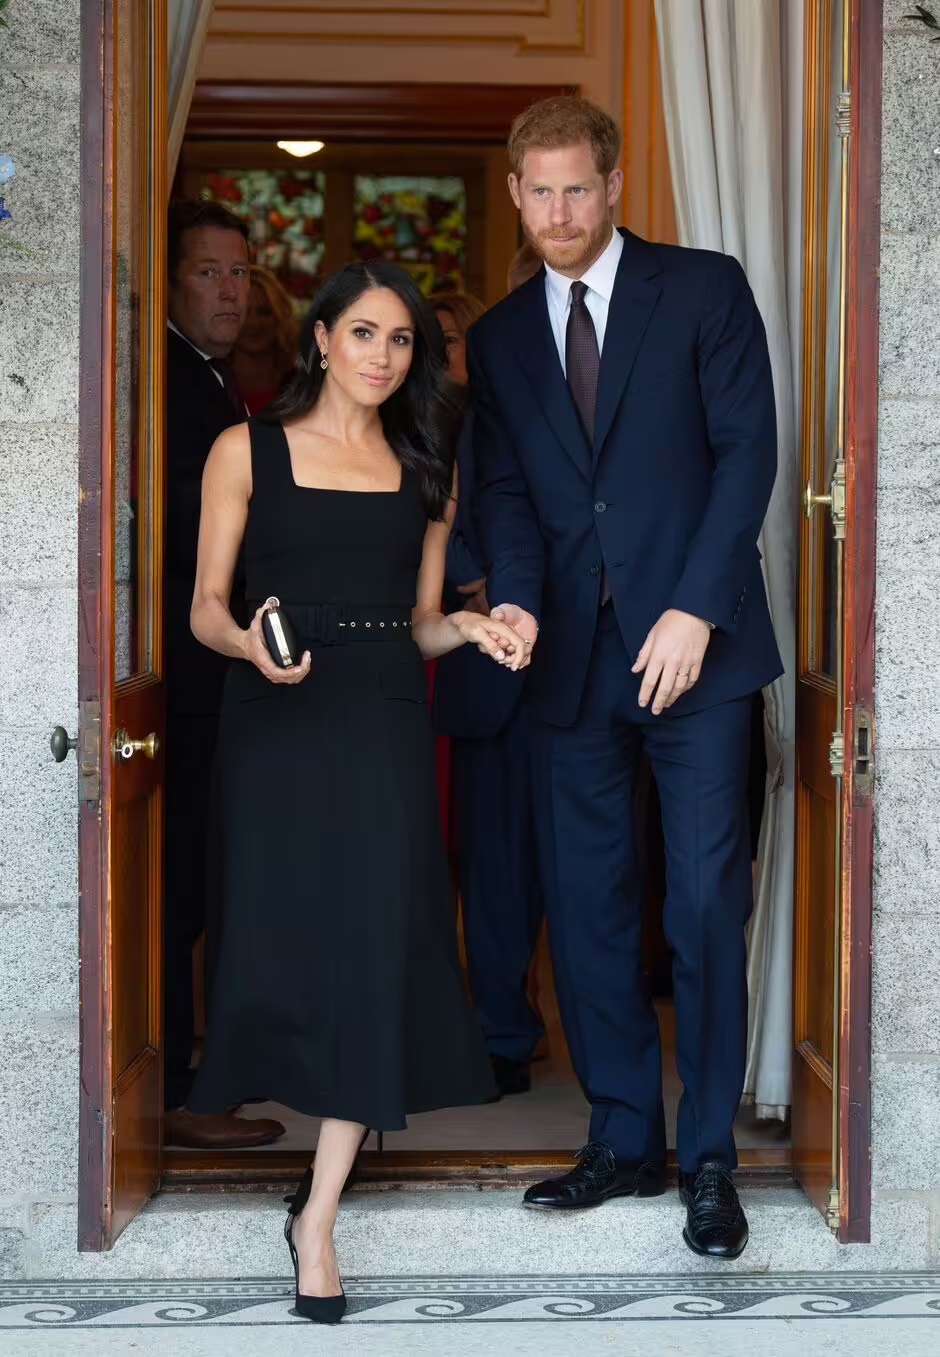 Royal Family LIVE: Meghan Markle issues demand to Prince Harry over UK return